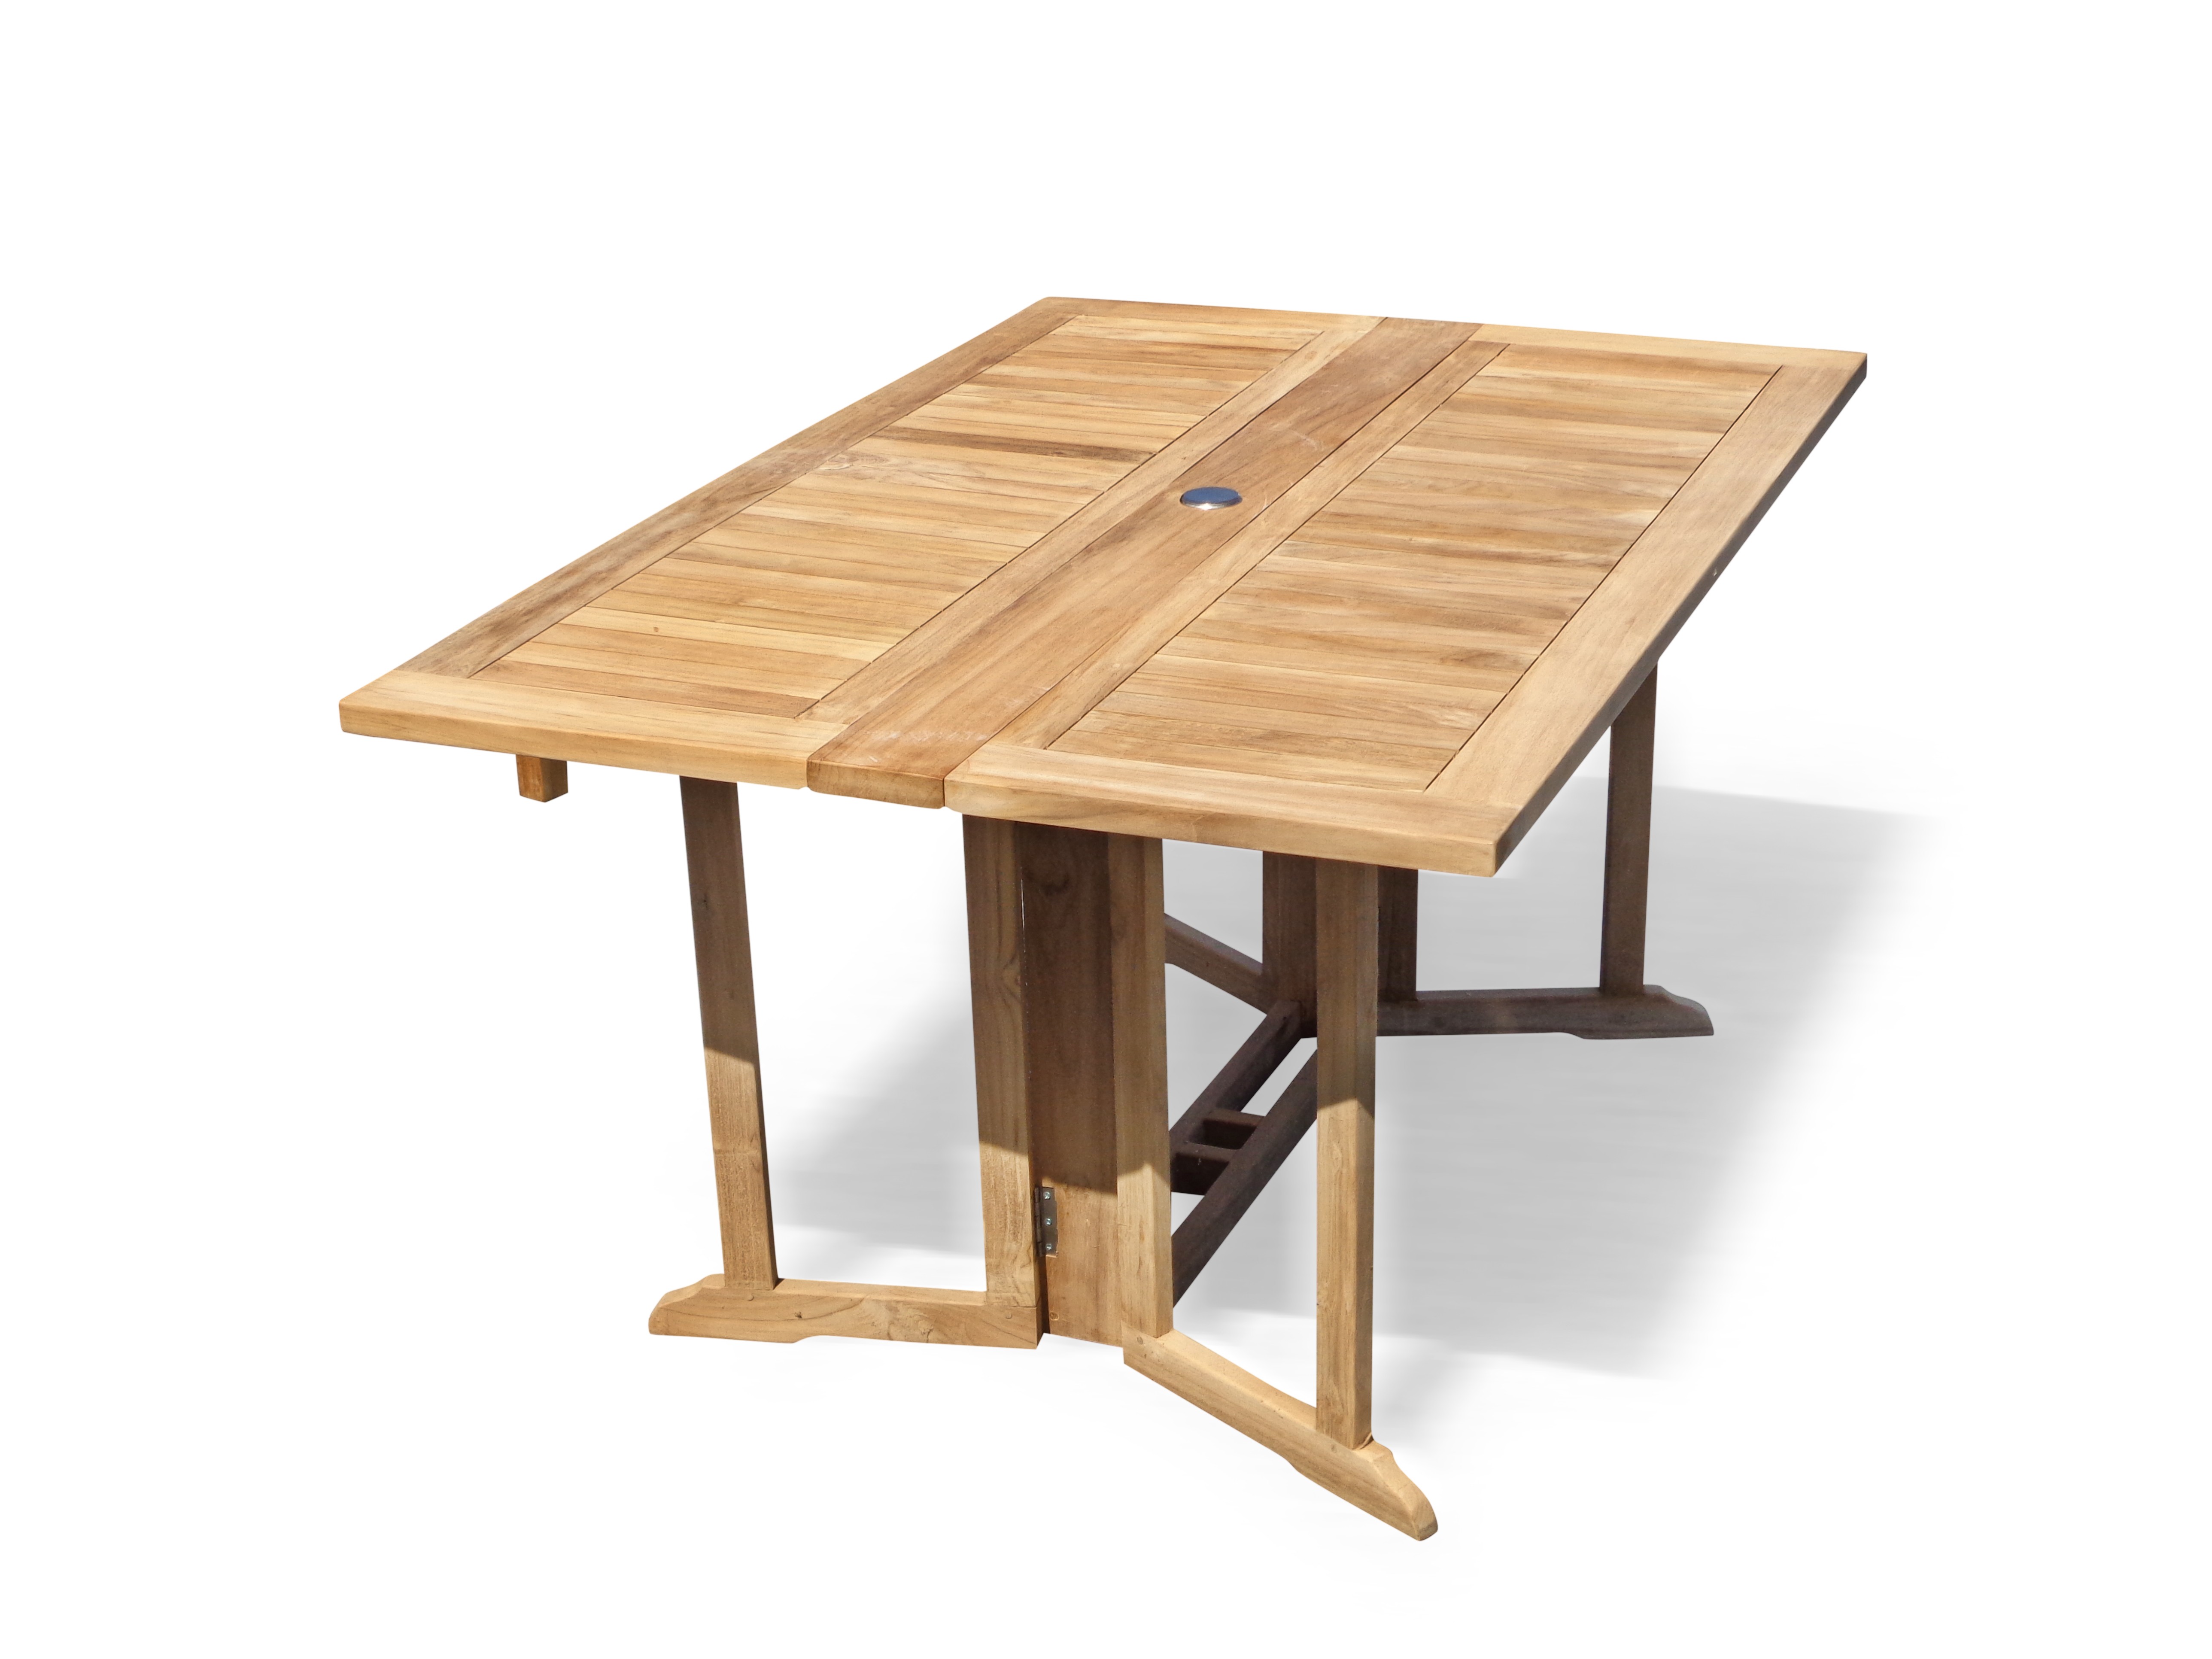 Barcelona 59" x 39" Rectangular Drop Leaf Folding Dining Teak Table...use with 1 Leaf Up or 2.... Makes 2 different tables